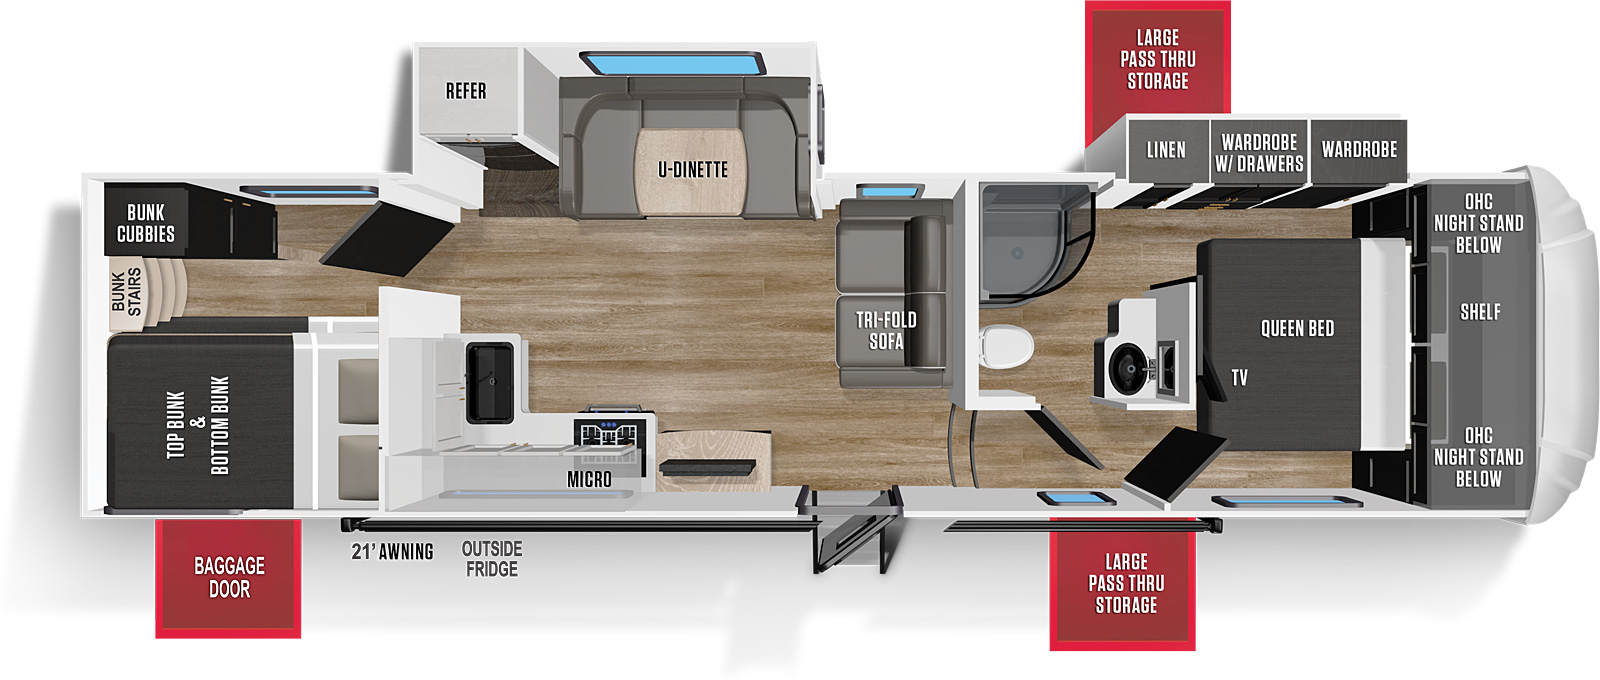 Wildcat Fifth Wheels 297BH floorplan. The 297BH has 2 slide outs and one entry door.